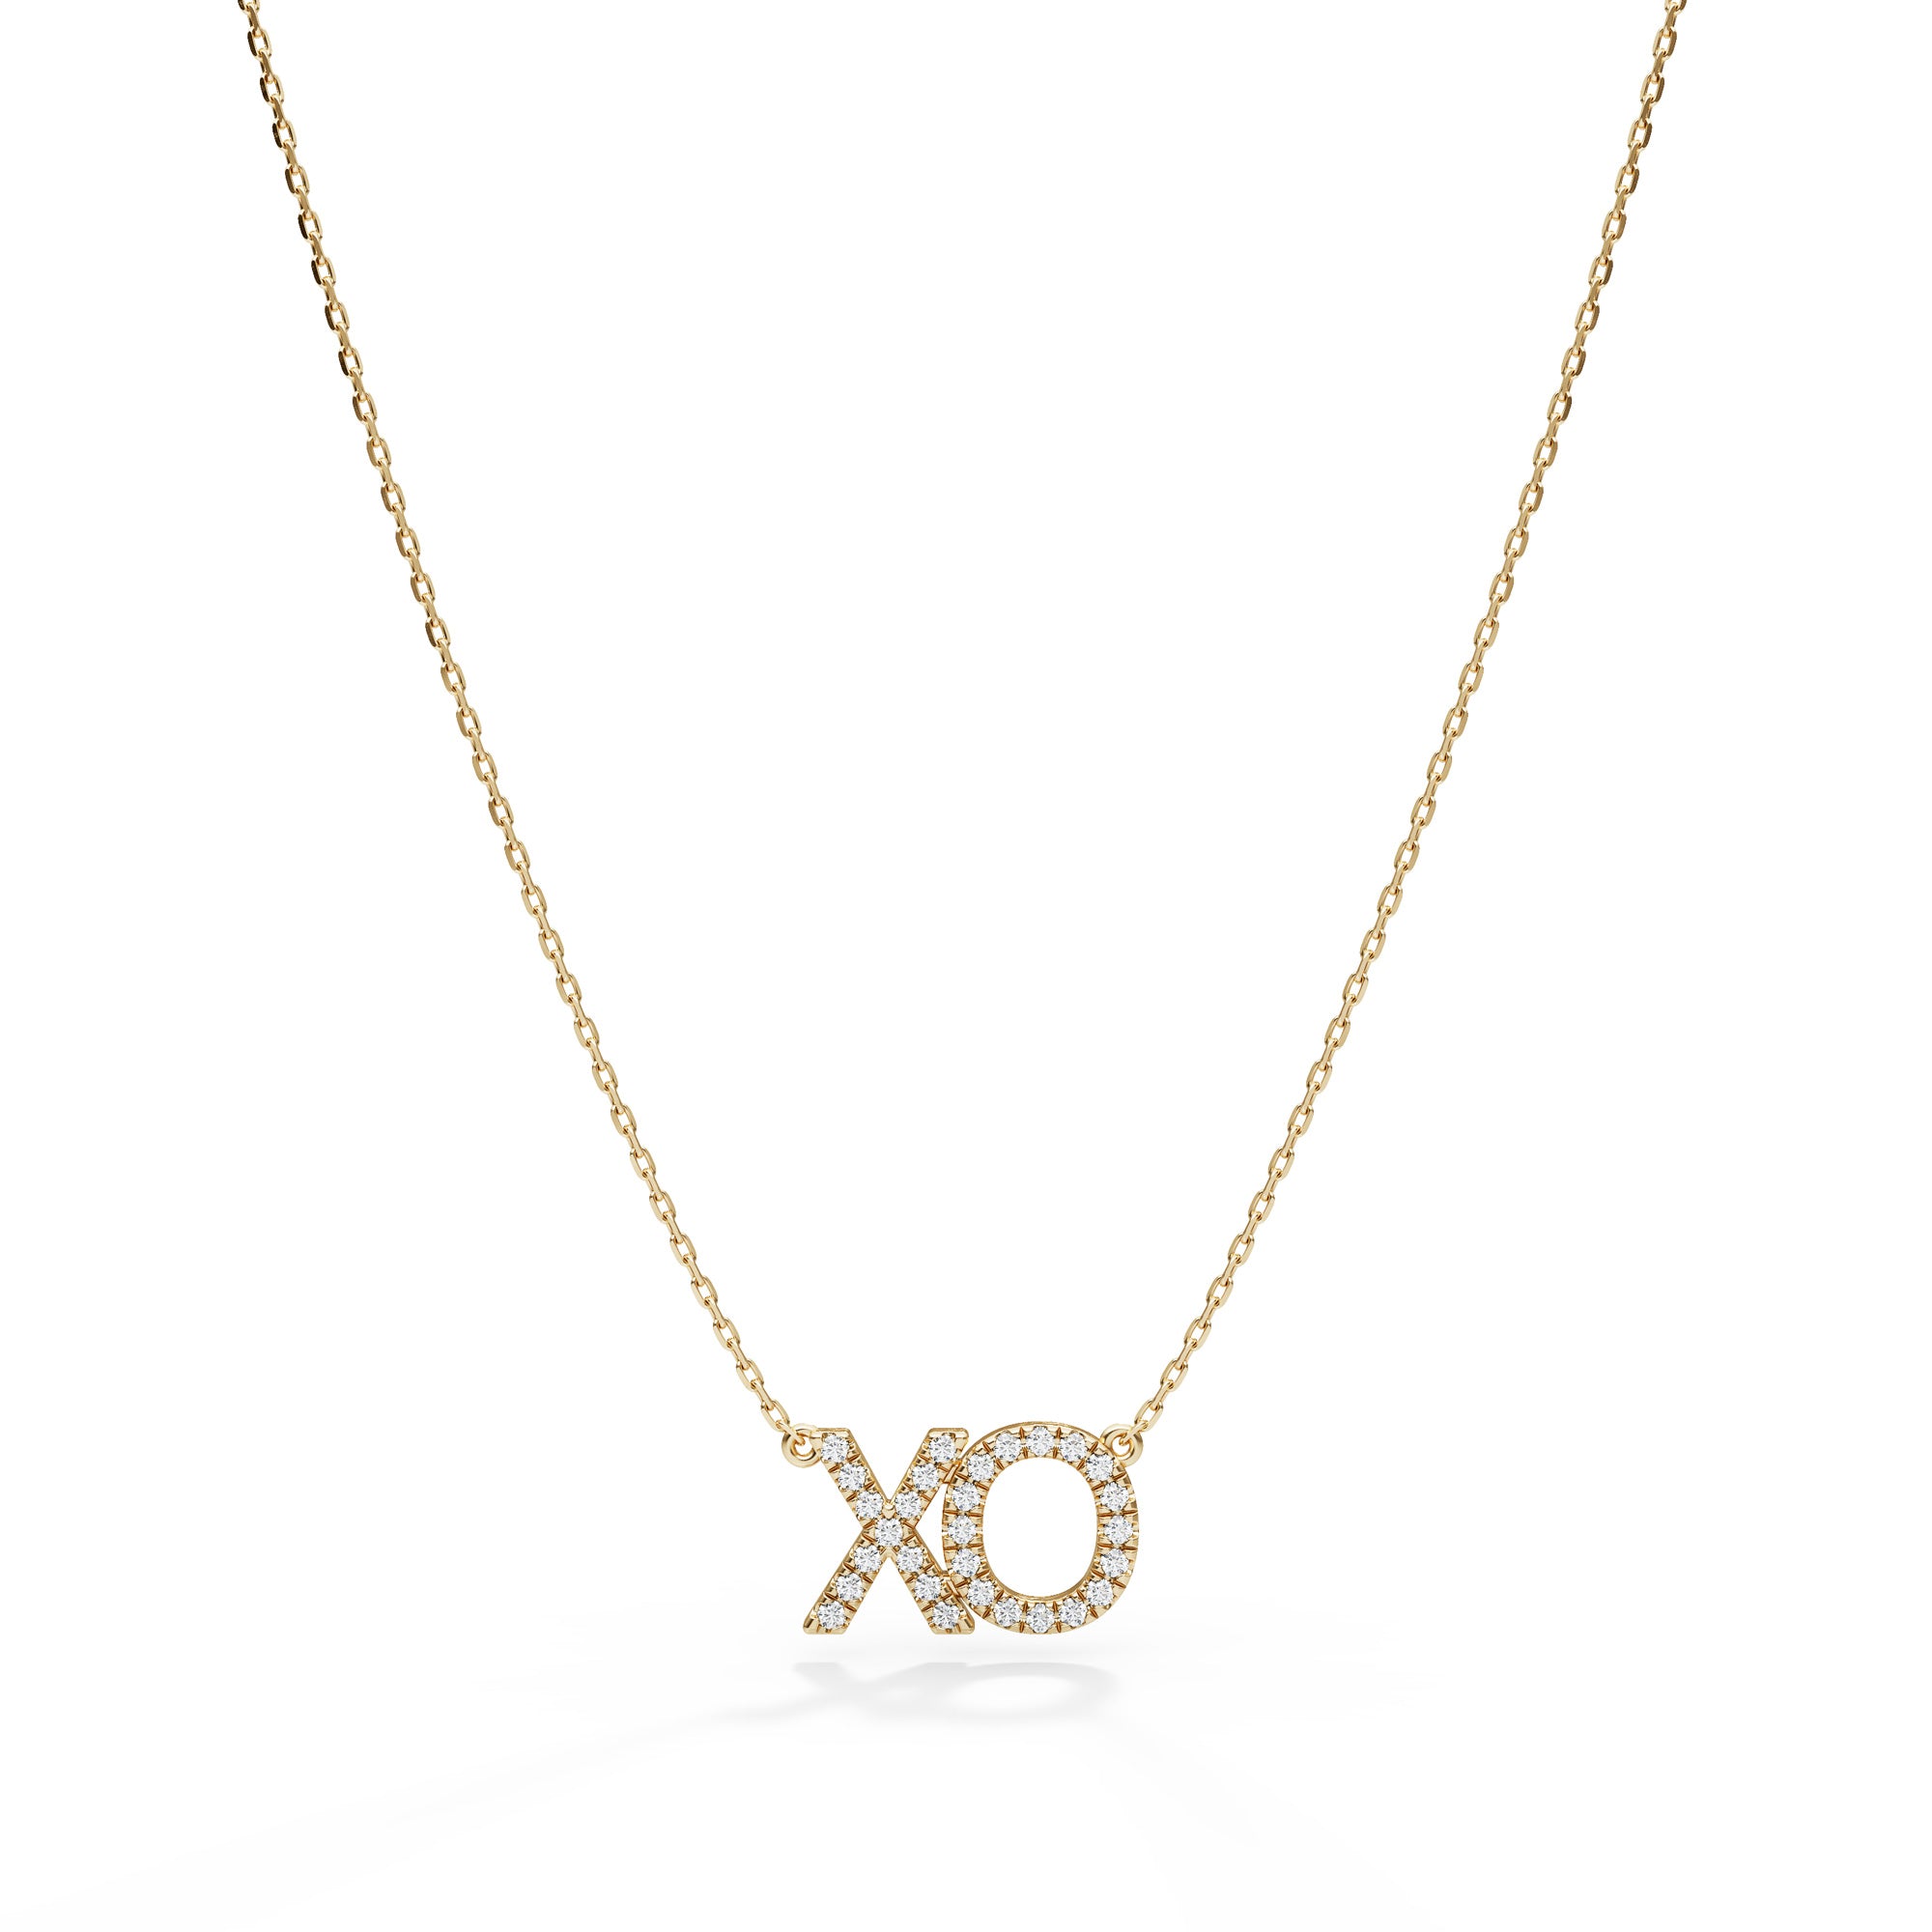 Pavé Diamond 2 Letter Initial Necklace in 14K Gold